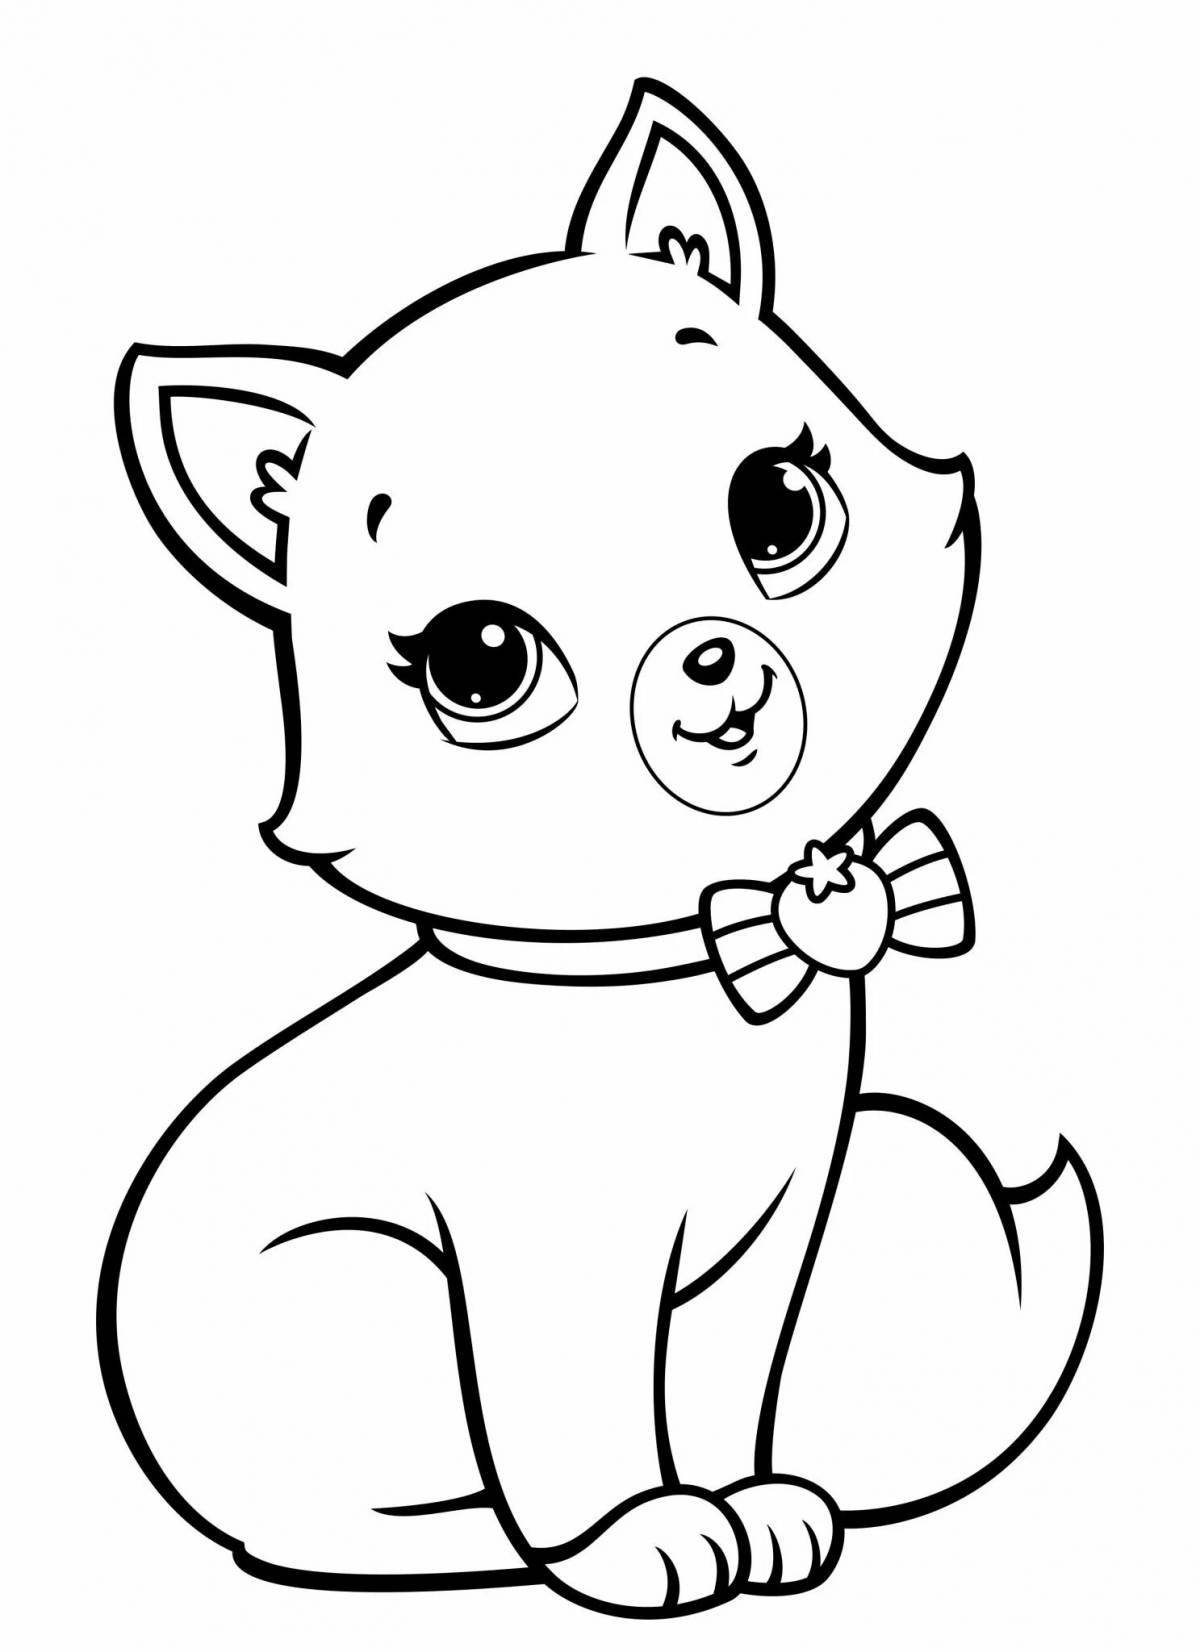 Colorful dog and cat coloring pages for kids